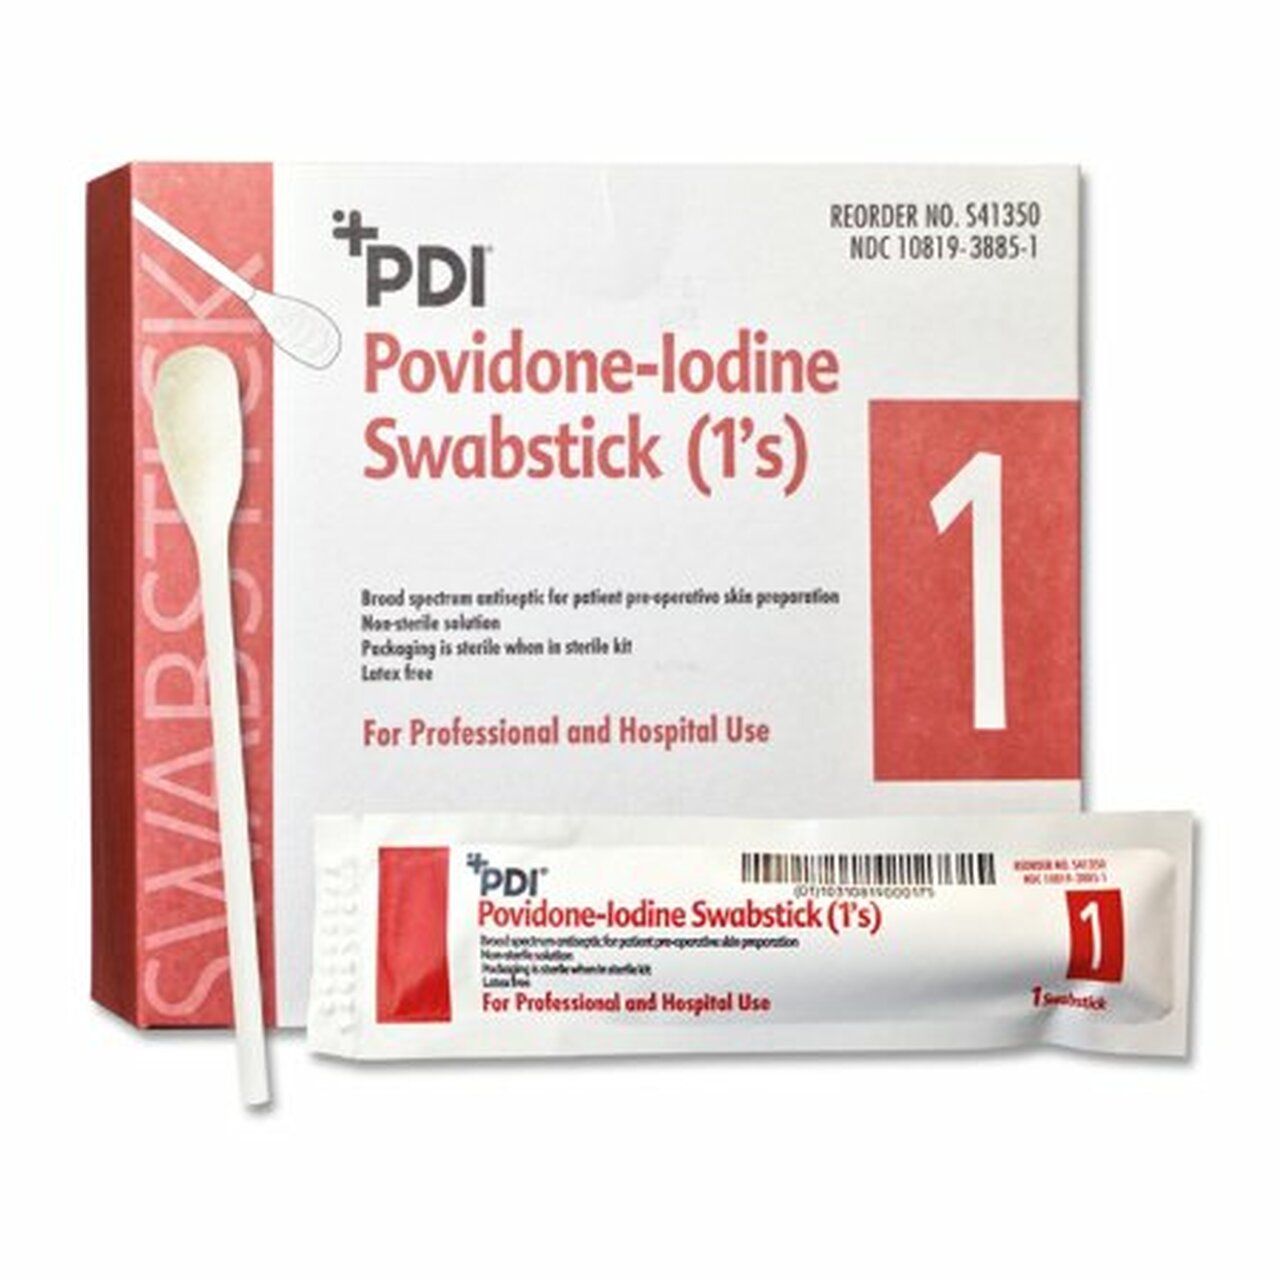 Povidone Iodine Swabsticks Products, Supplies and Equipment